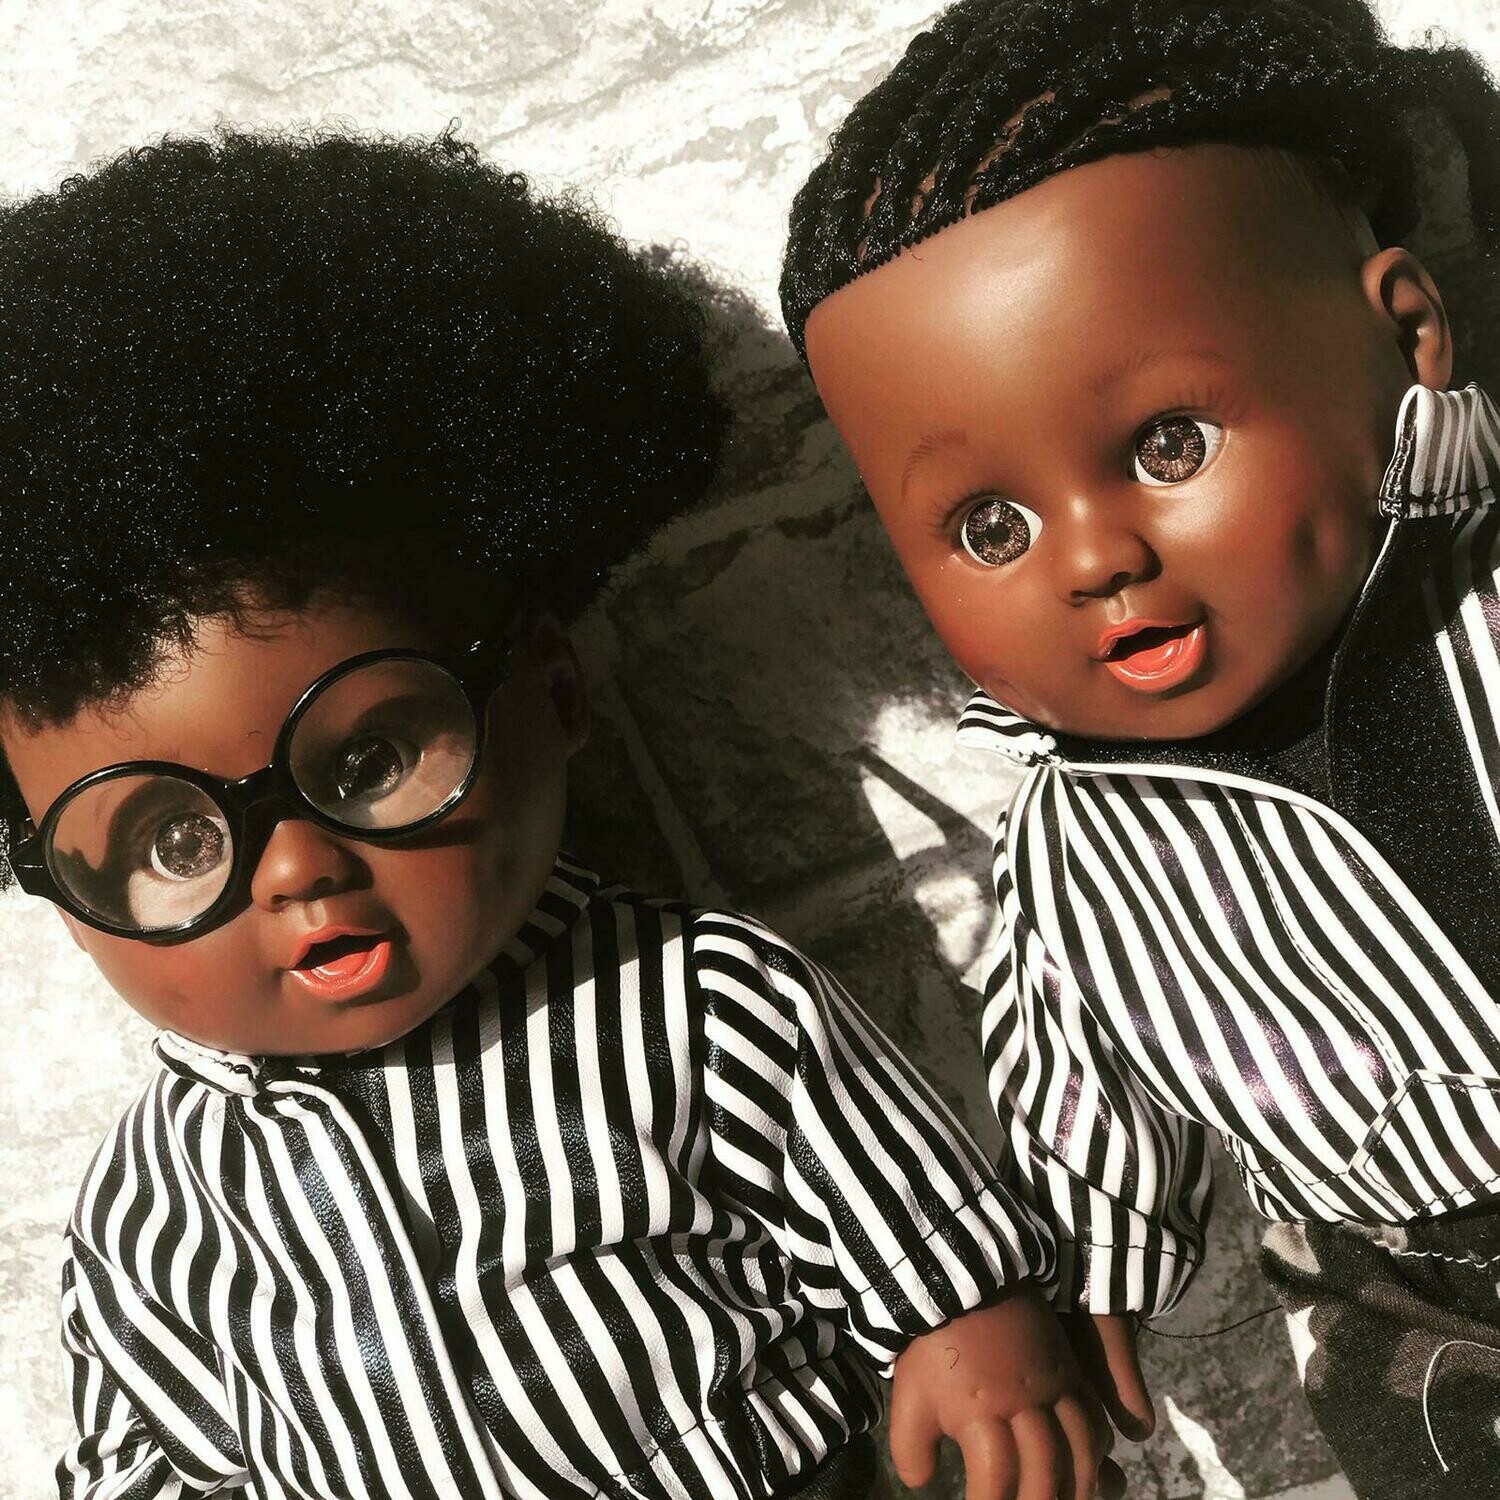 Reuben Doll- Afro hair
wearing Faux leather stripe jacket & clear circle glasses